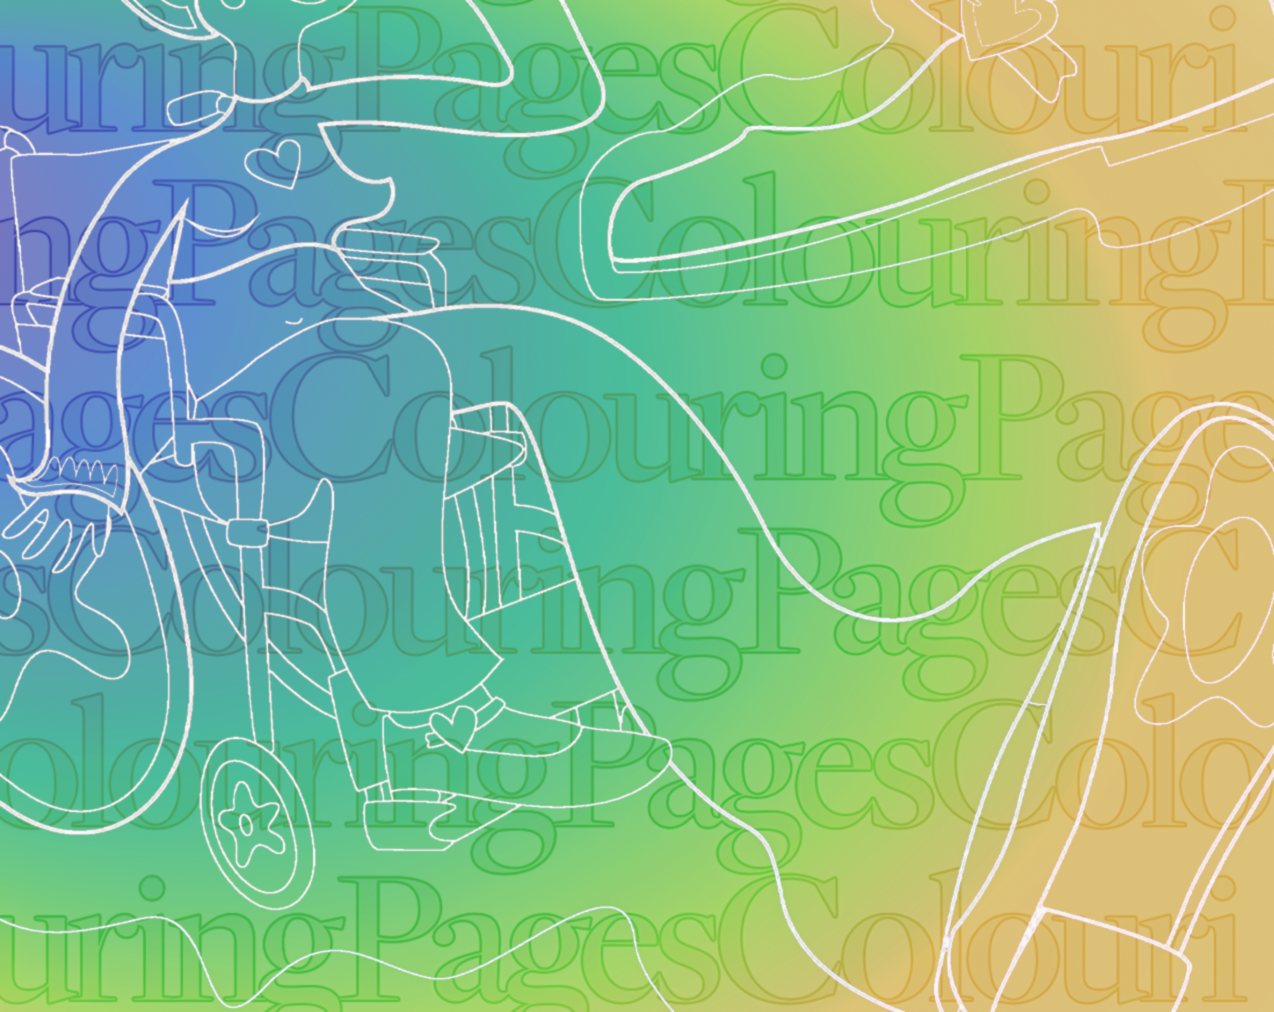 Text reading “Colouring Pages” overlaid with an expressive illustration of a figure on a colour gradient background.